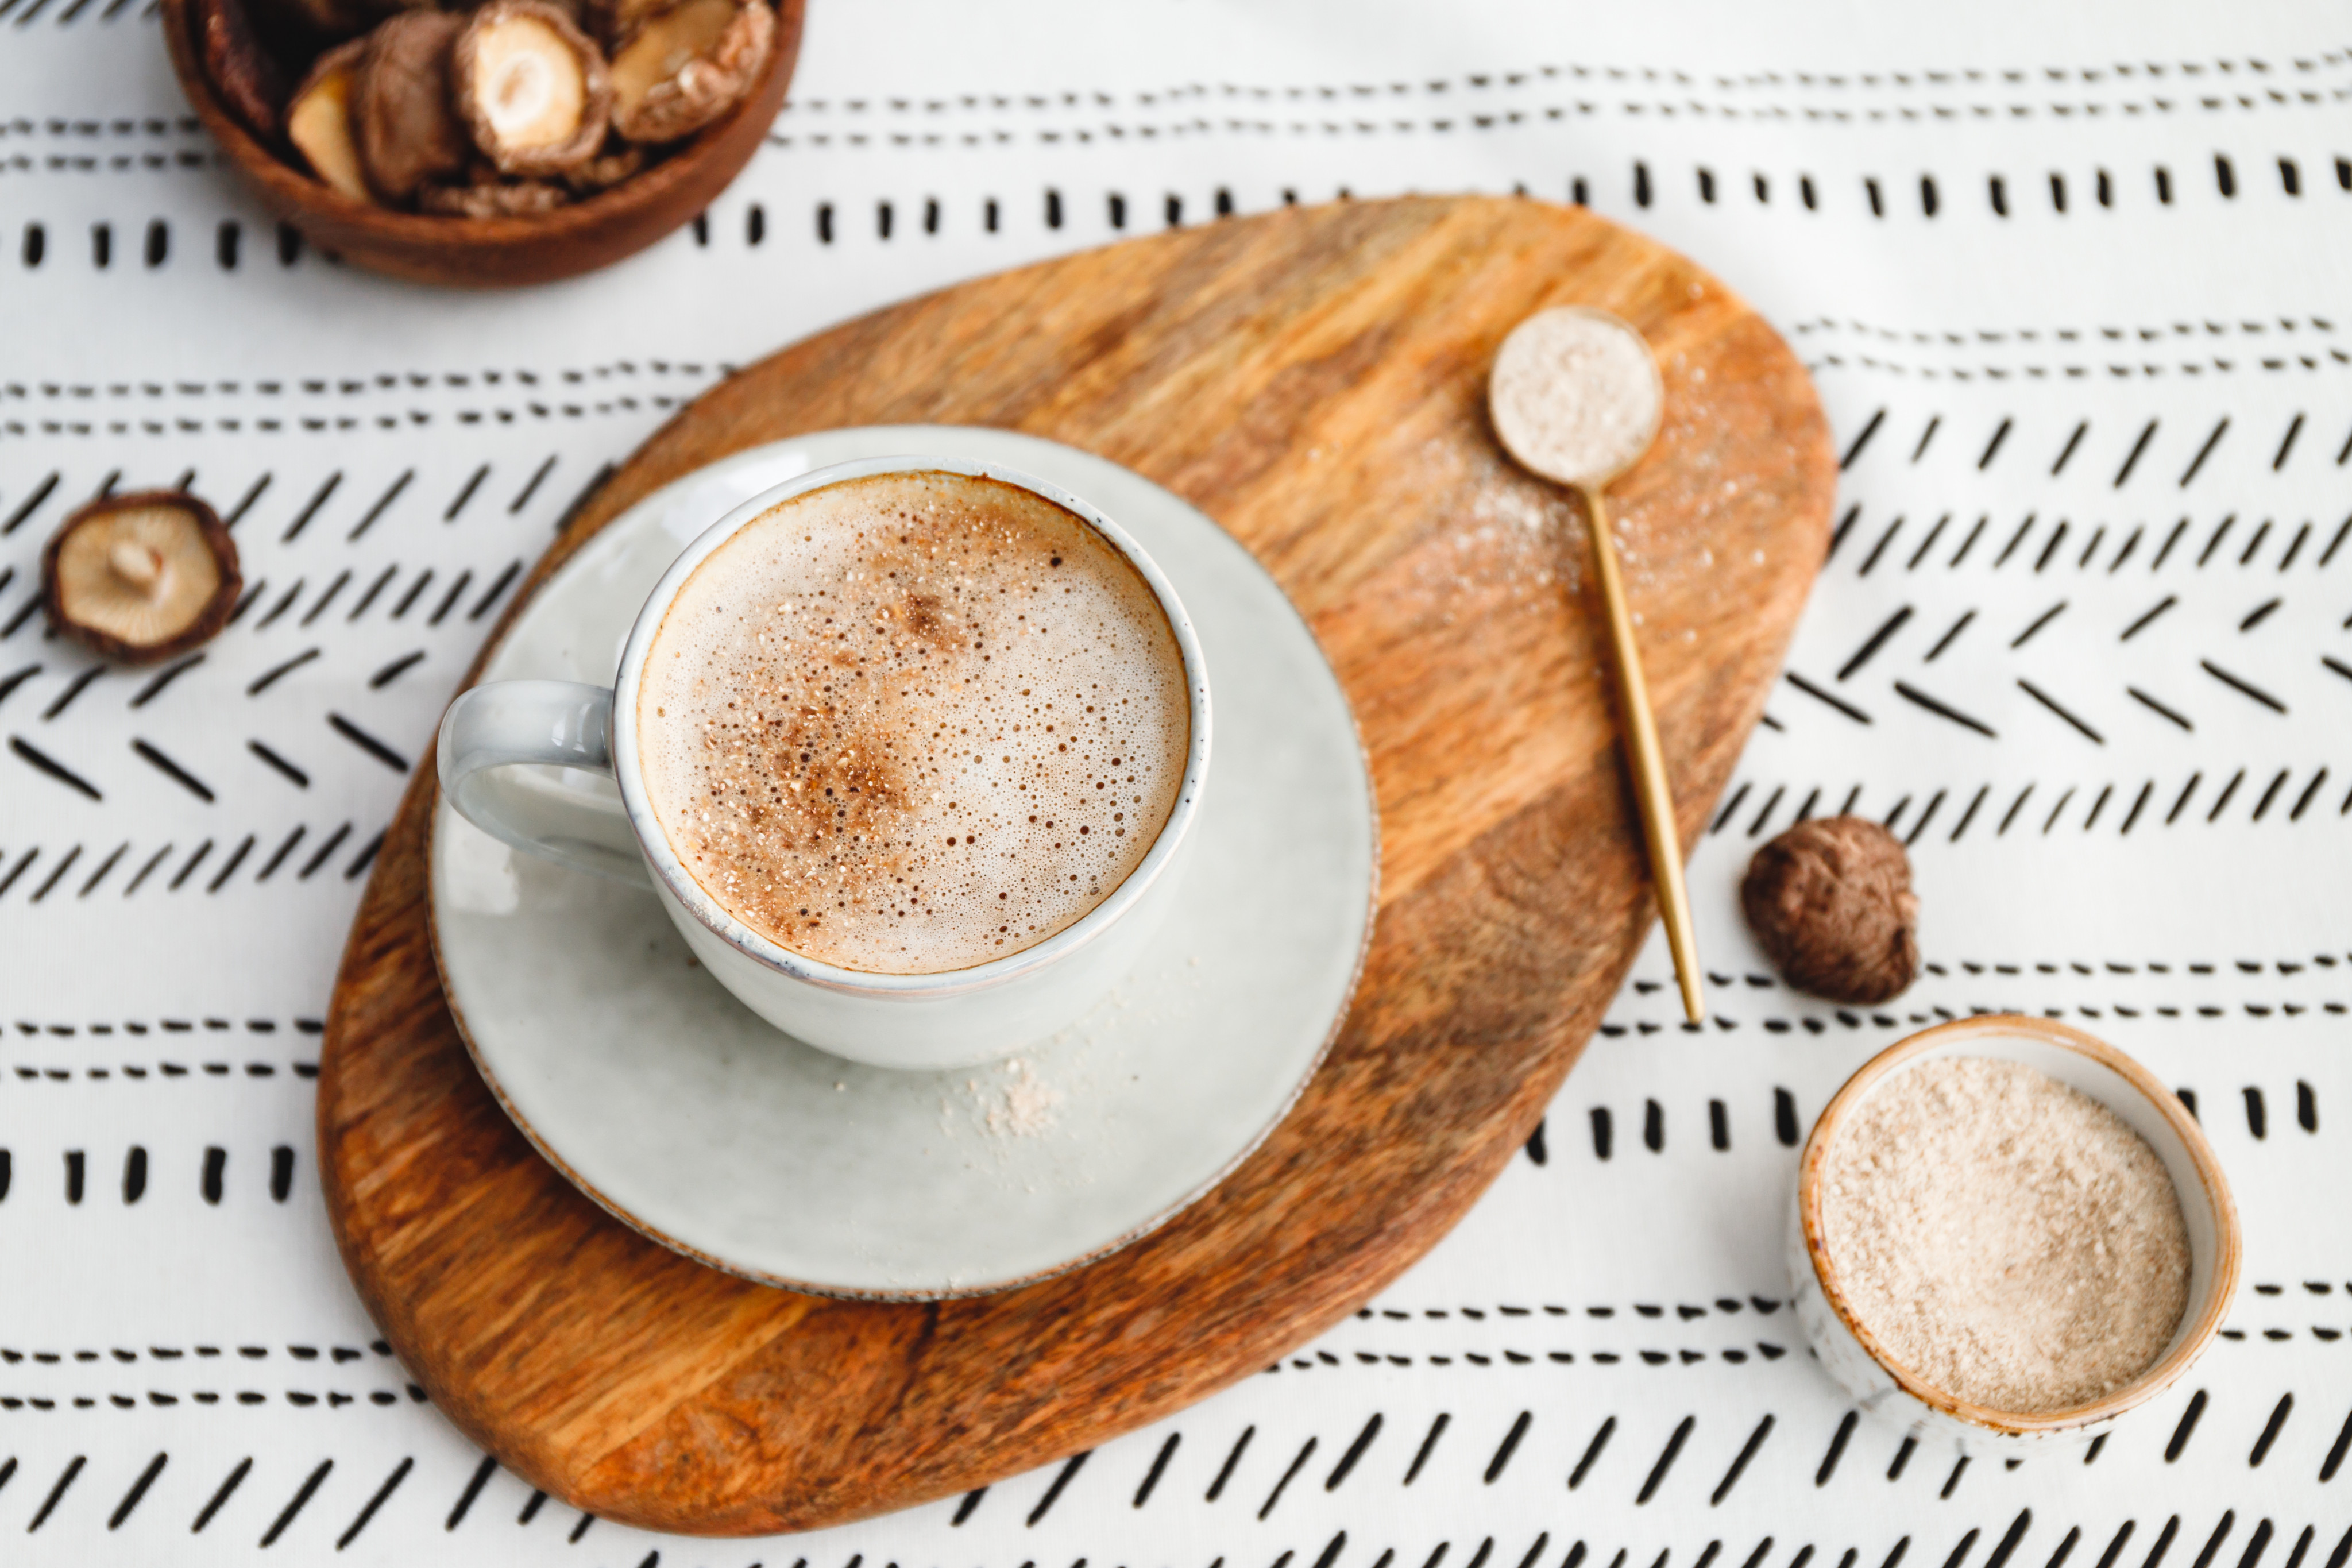 Mushrooms have many protective properties, and drinking mushroom coffee can boost your brain and improve your energy levels without giving you the caffeine jitters. Photo: Shutterstock
